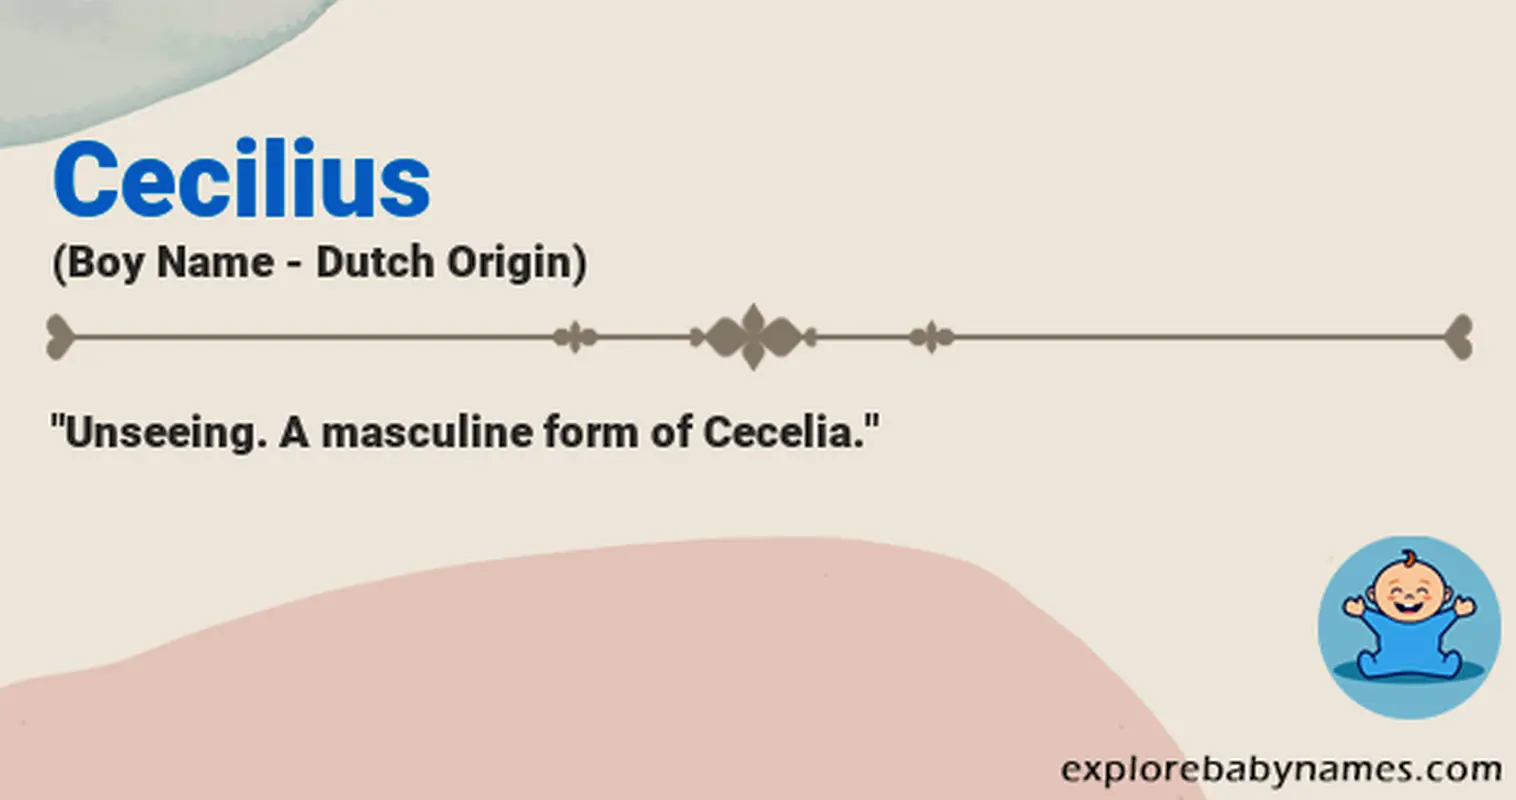 Meaning of Cecilius